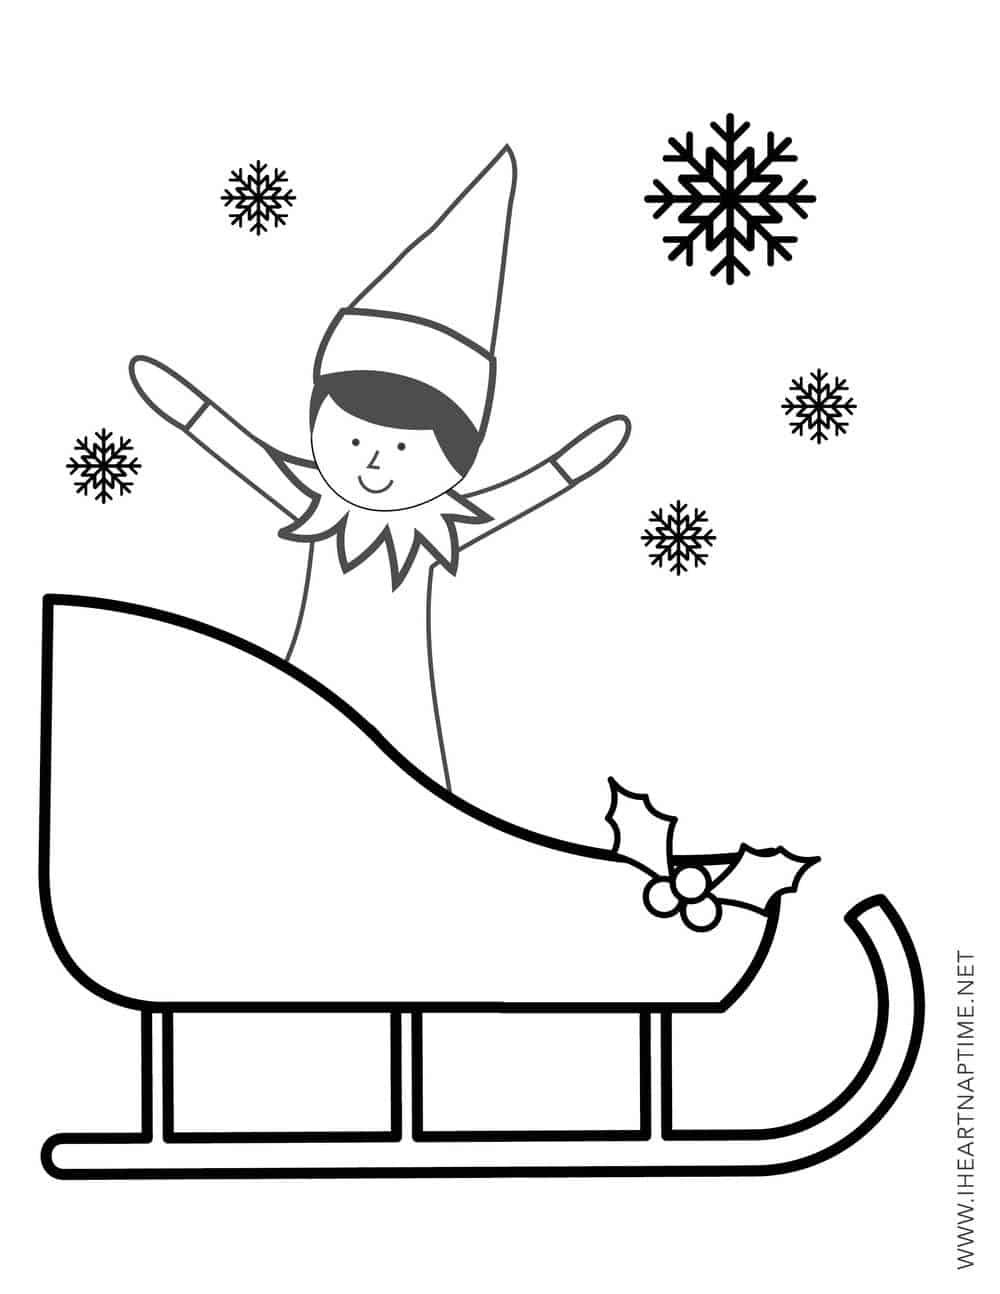 FREE Elf on the Shelf Coloring Pages - The Inspiration Board